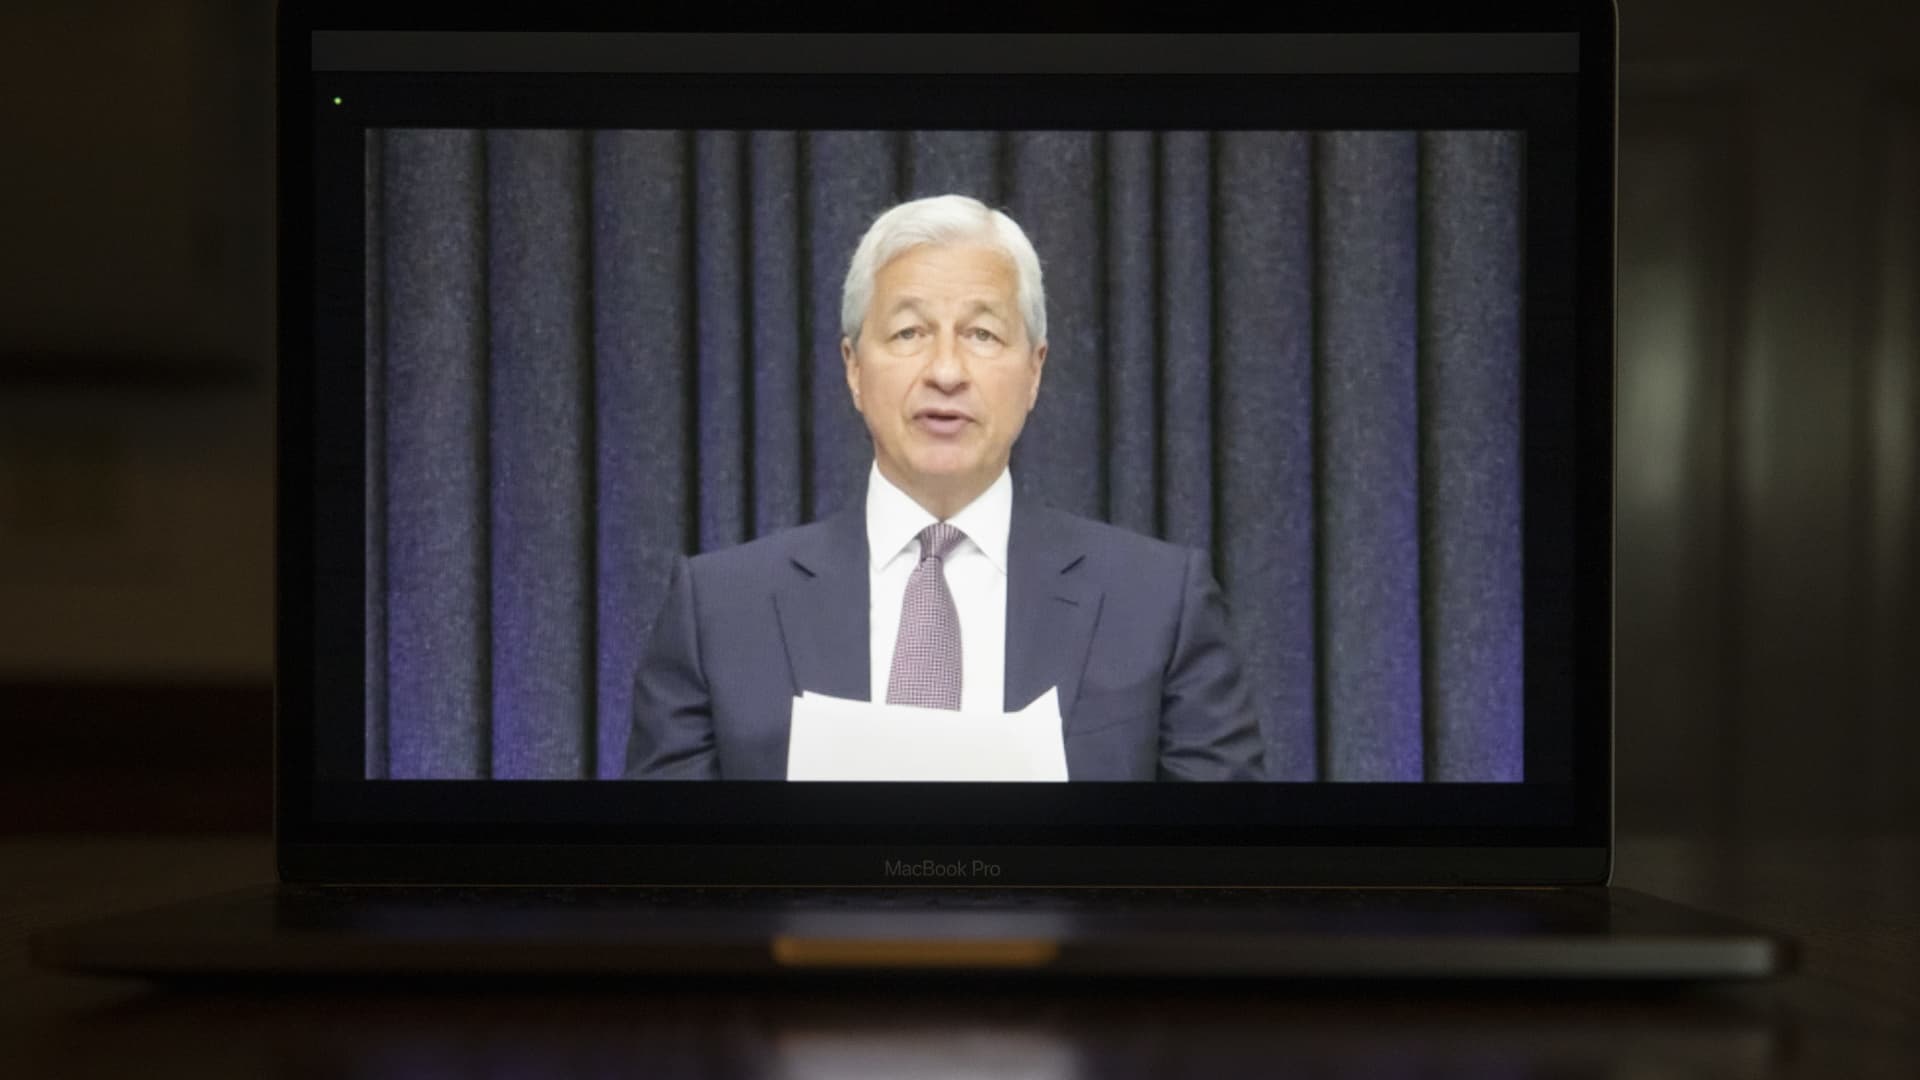 Jamie Dimon, chief executive officer of JPMorgan Chase & Co., speaks during a Senate Banking, Housing and Urban Affairs Committee hearing held virtually on a laptop computer in Tiskilwa, Illinois, U.S., on Tuesday, May 25, 2021.